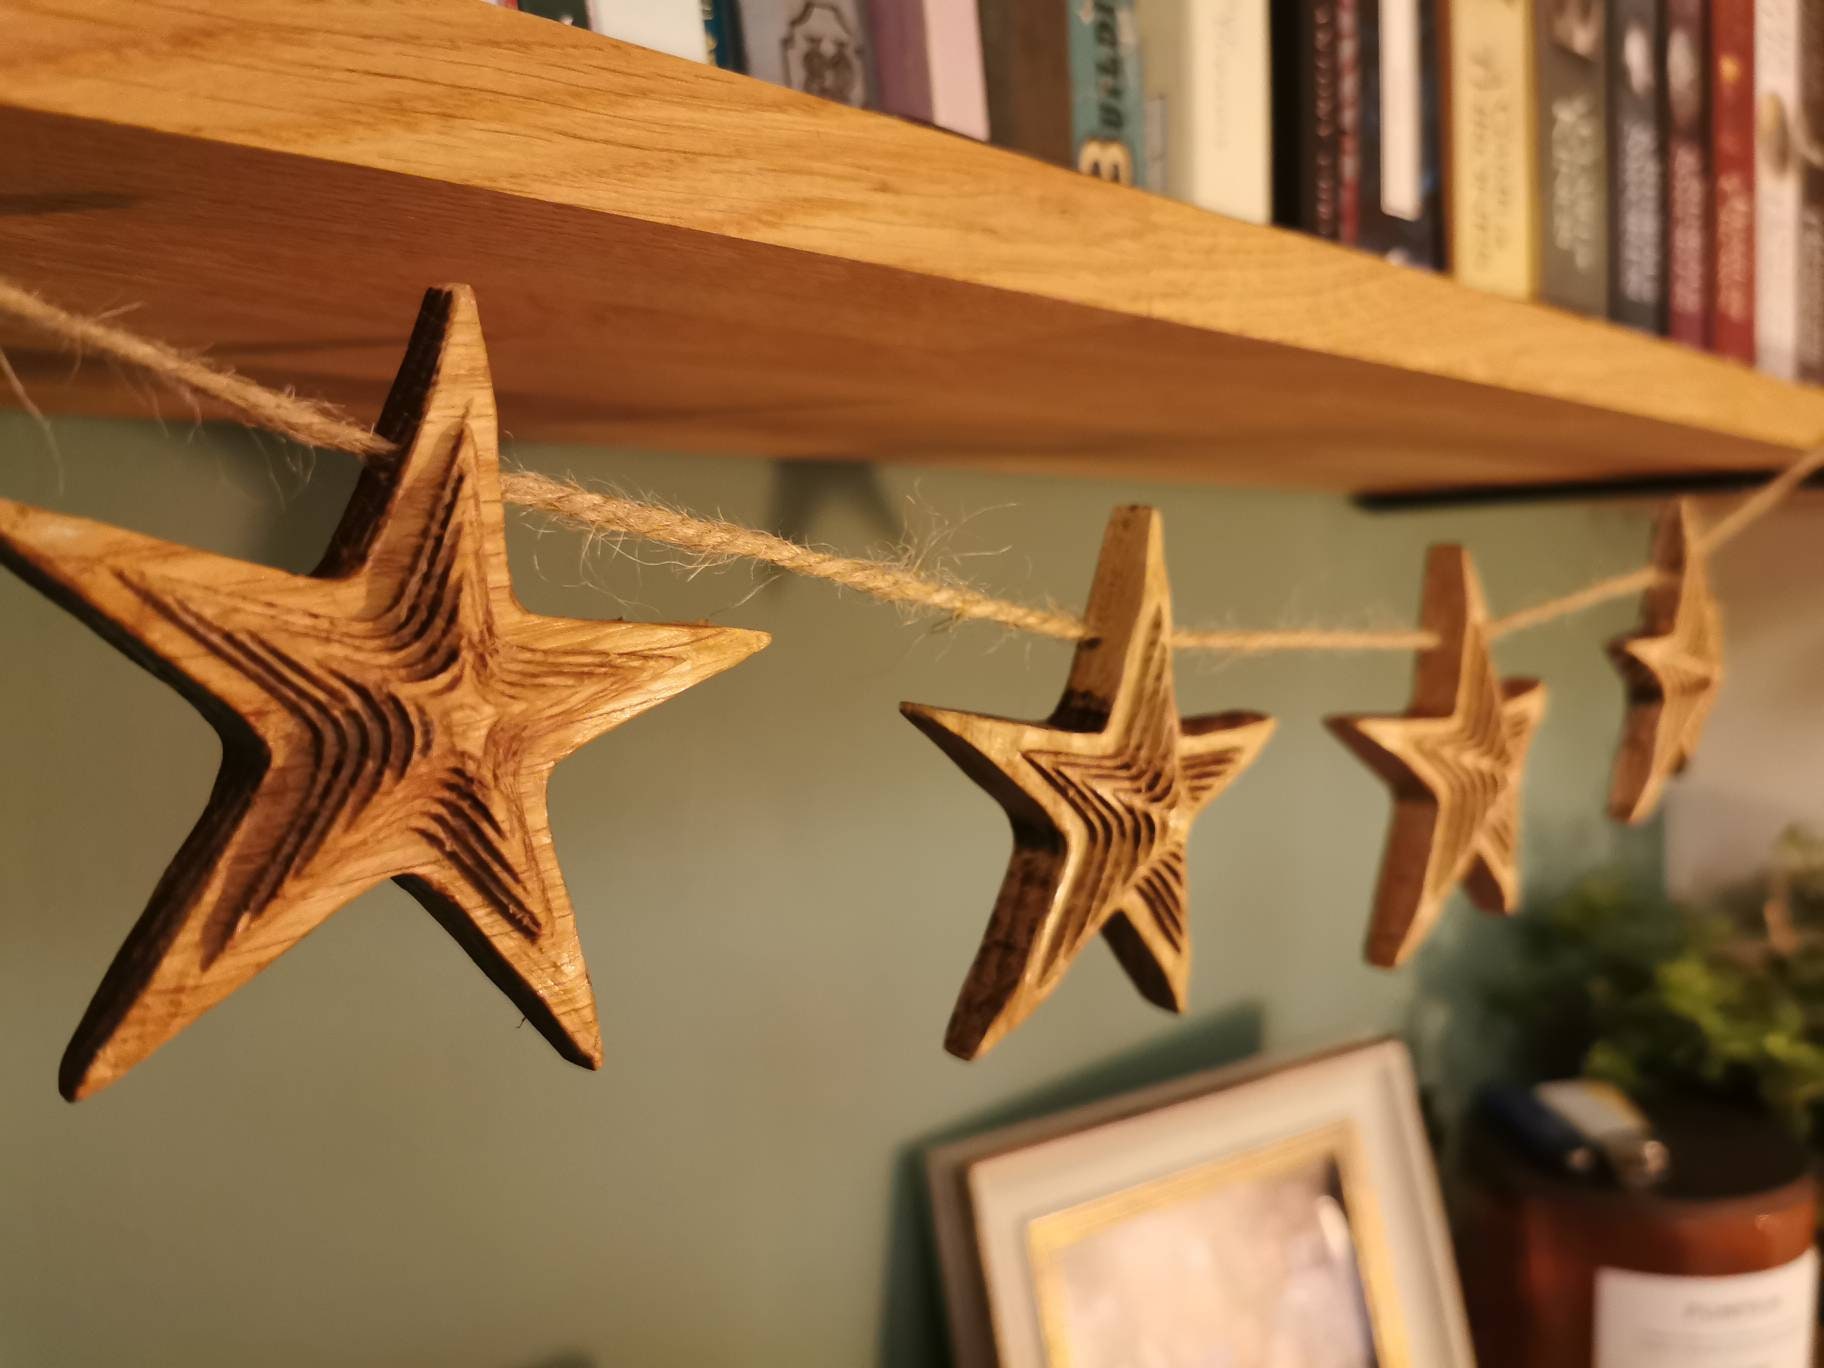 515,235 Wooden Stars Images, Stock Photos, 3D objects, & Vectors